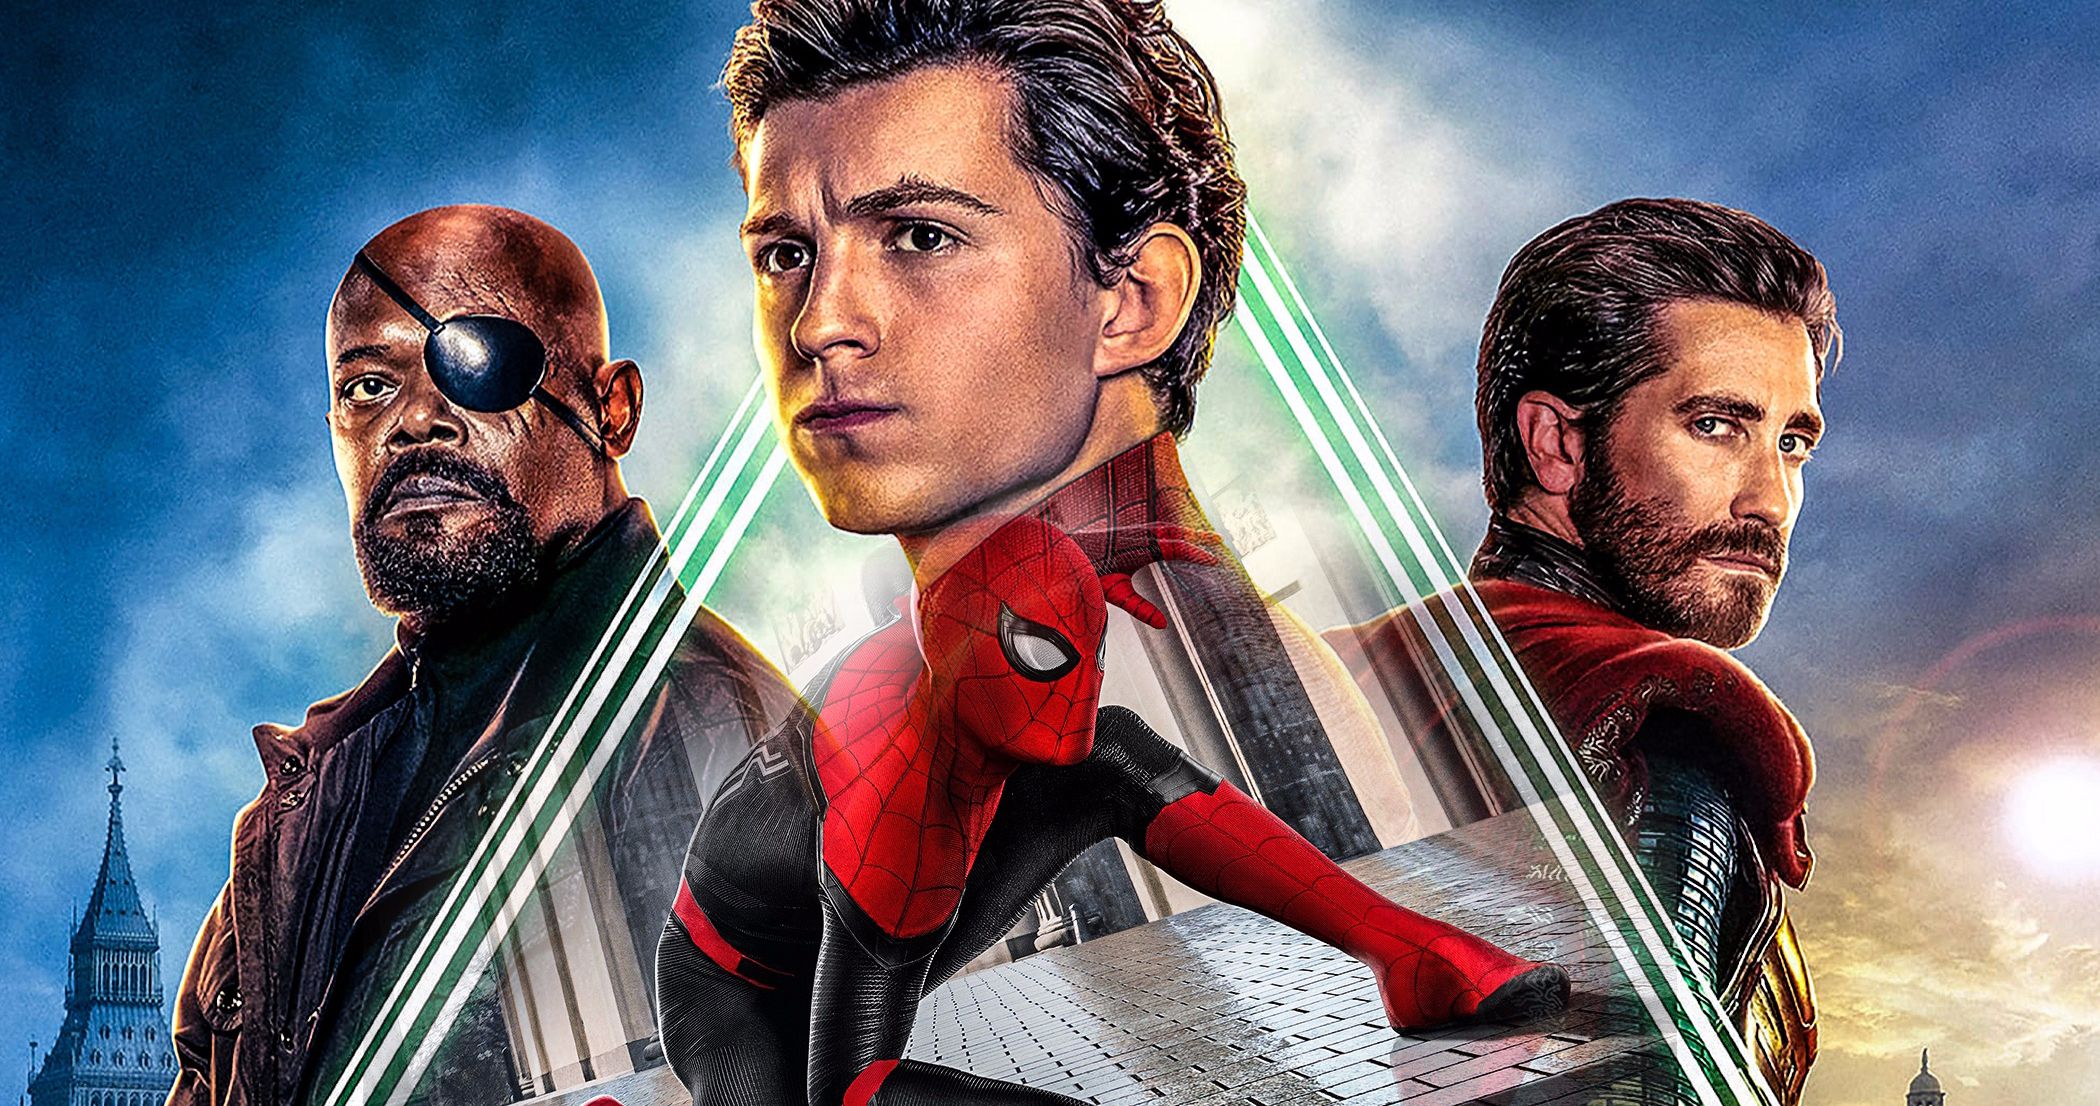 Spider-Man Poster Mistake Has Samuel L. Jackson Striking Down with Furious Anger